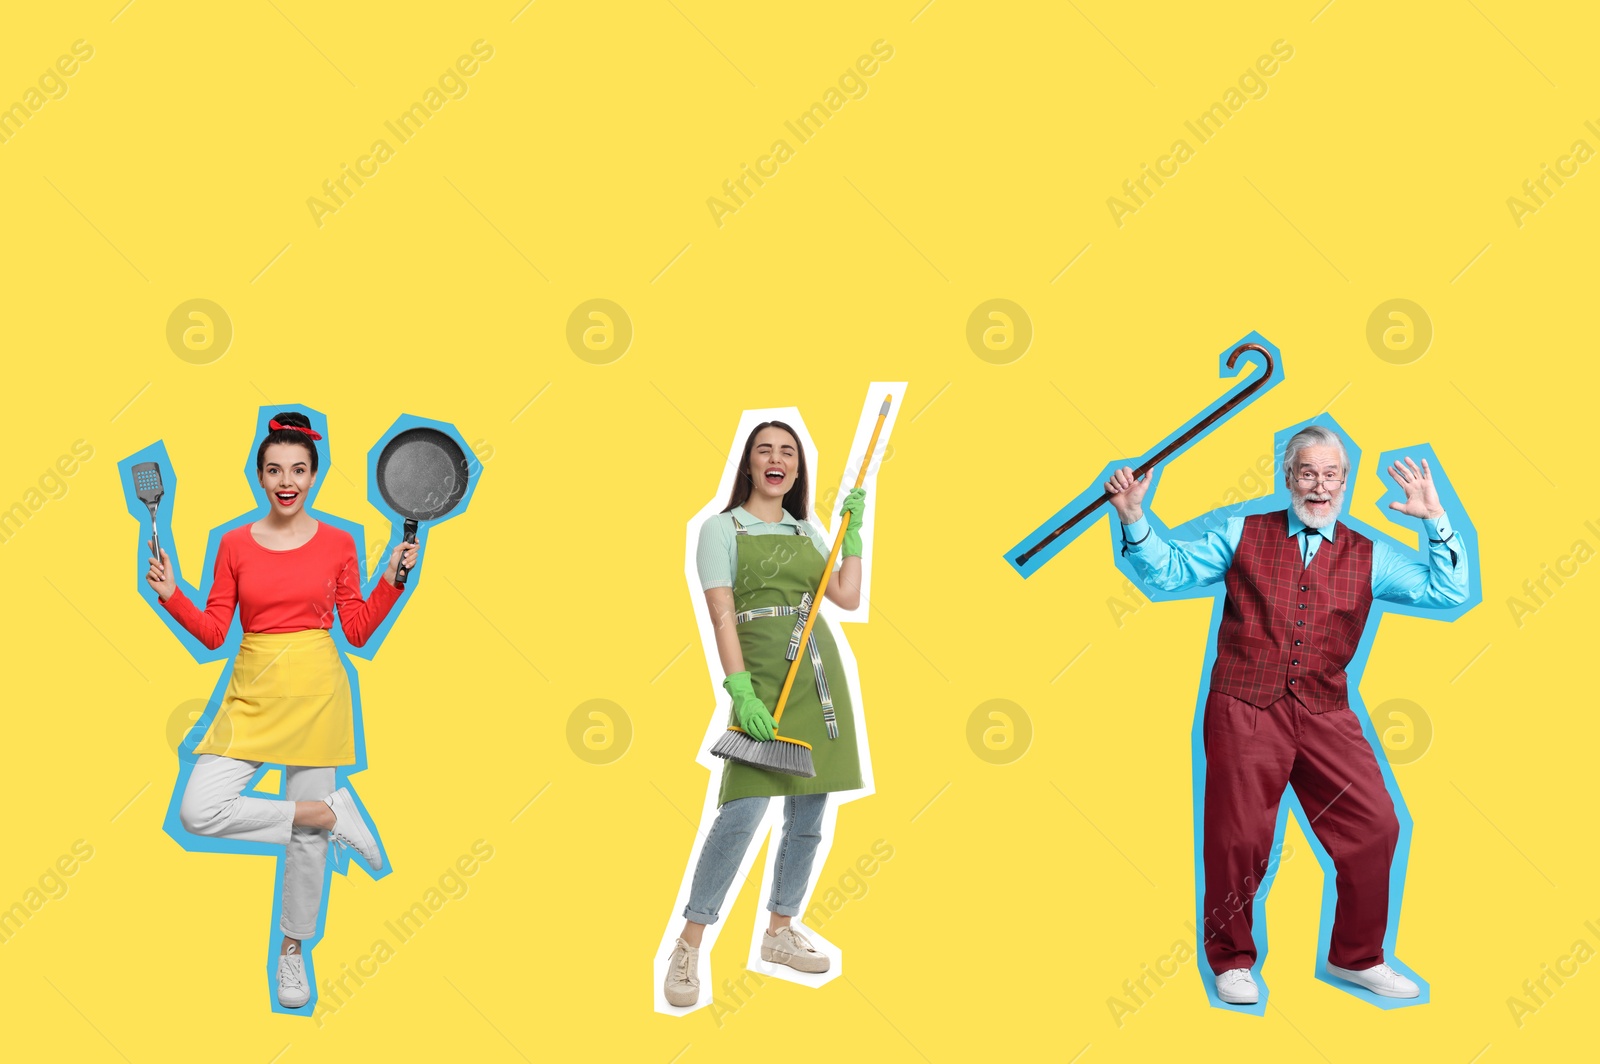 Image of Pop art poster. Happy women and man on yellow background